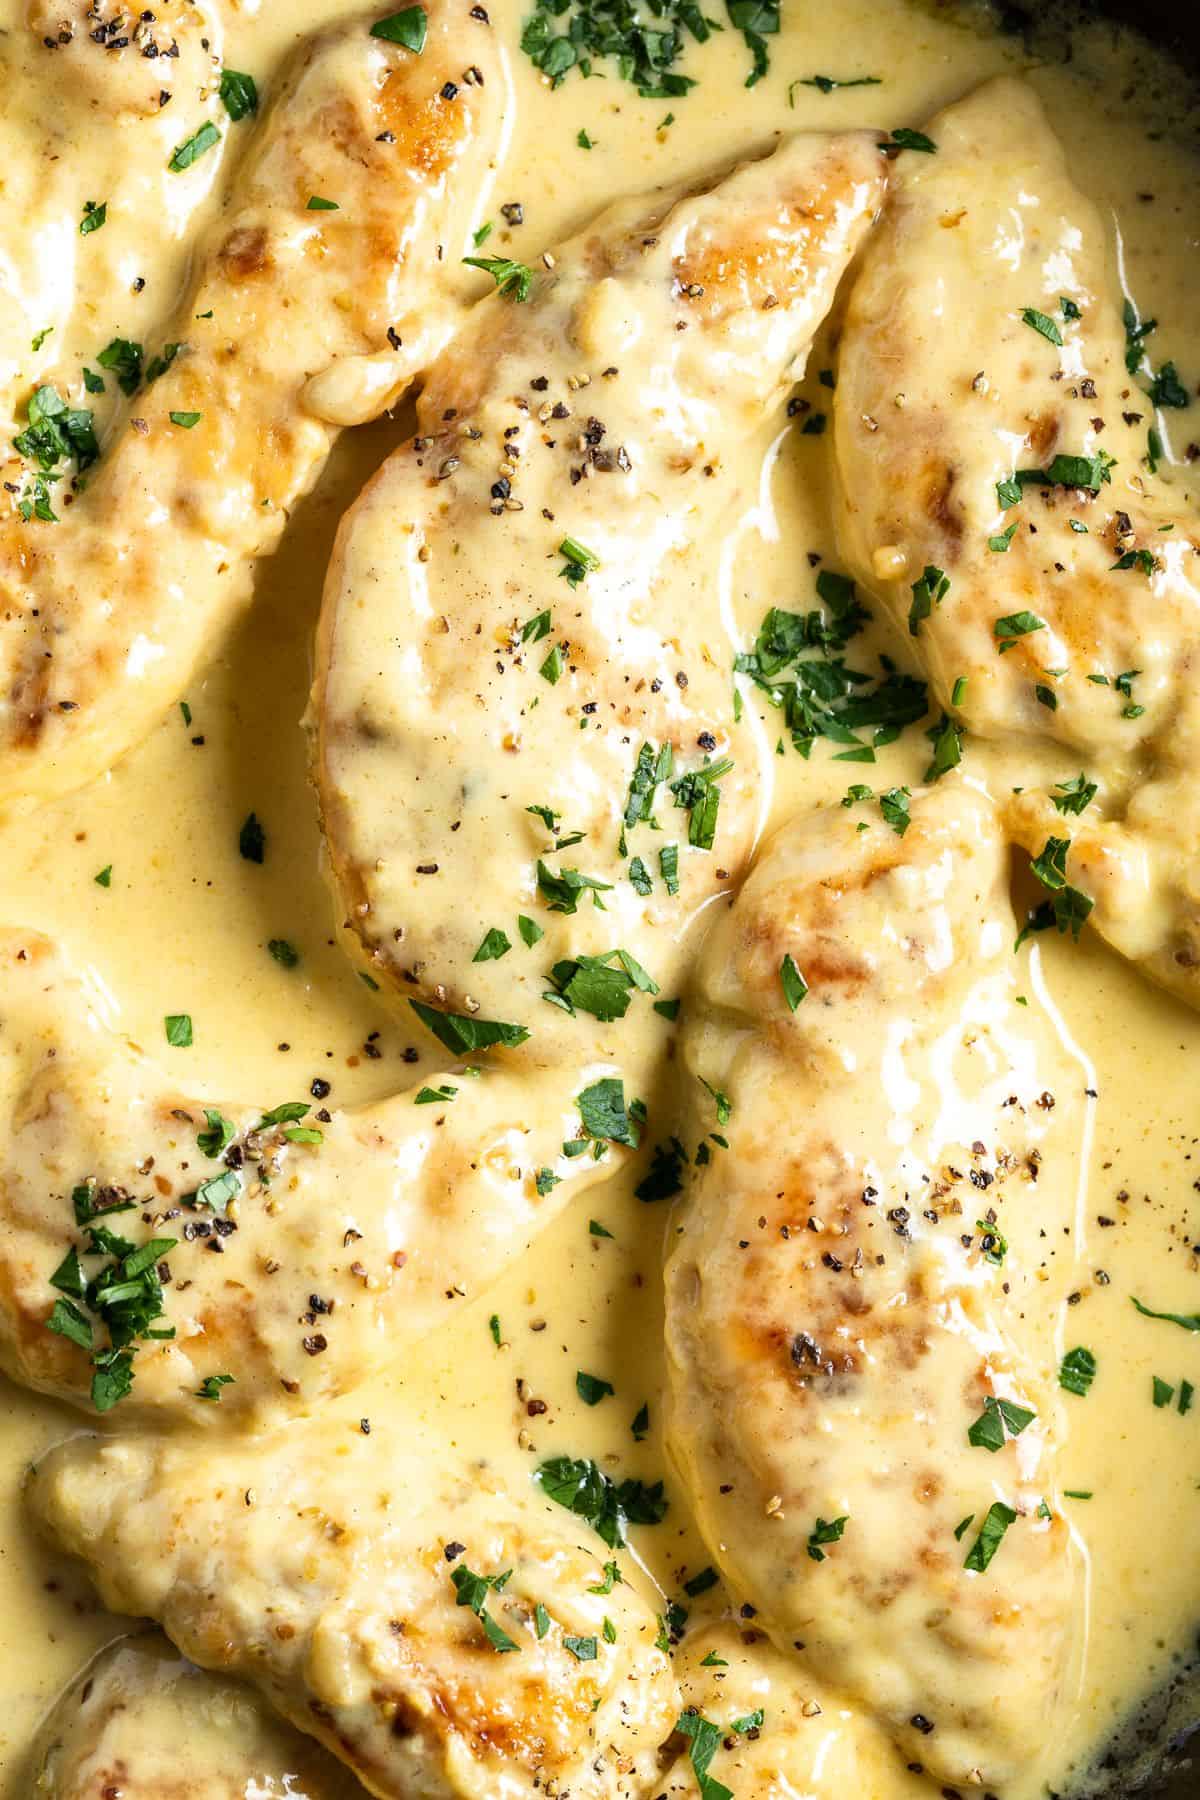 Up close shot of finished dish of chicken in cream sauce sprinkled with parsley.